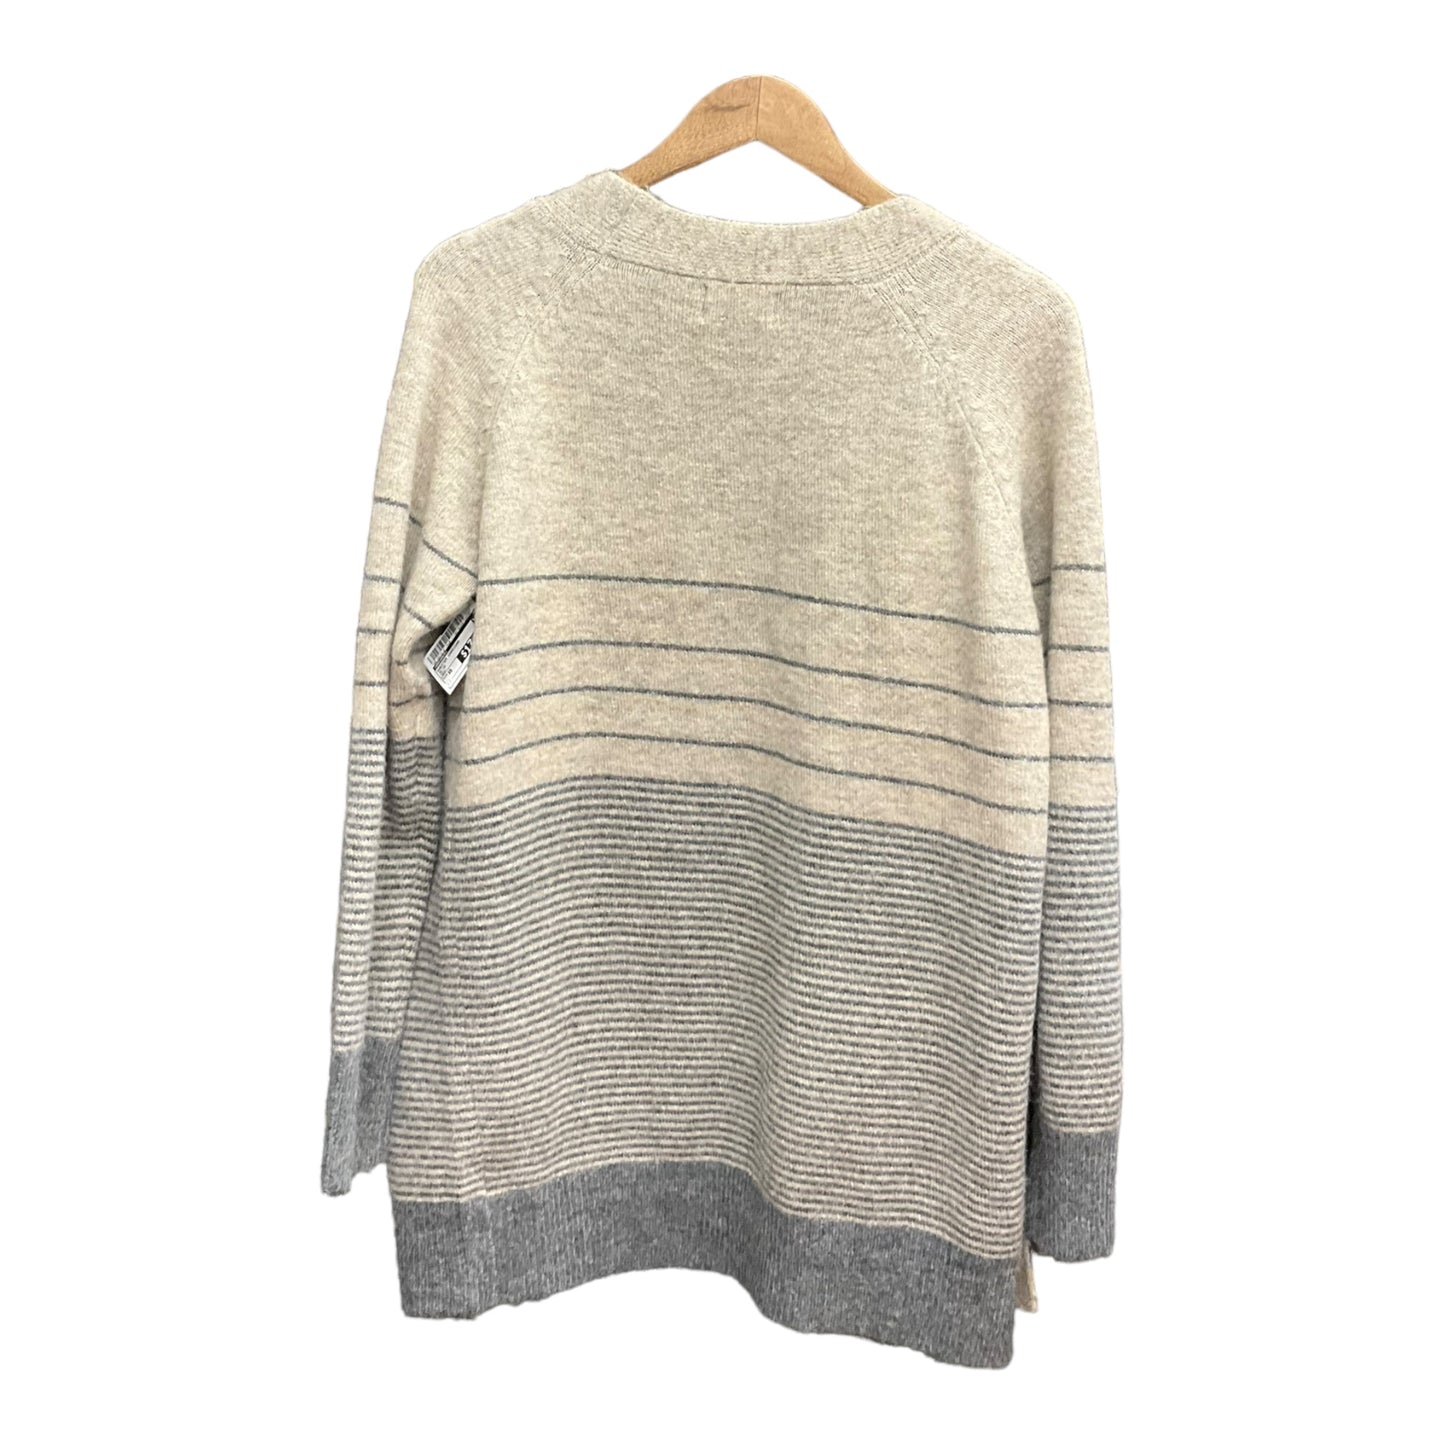 Sweater Cardigan By Dreamers  Size: Xs